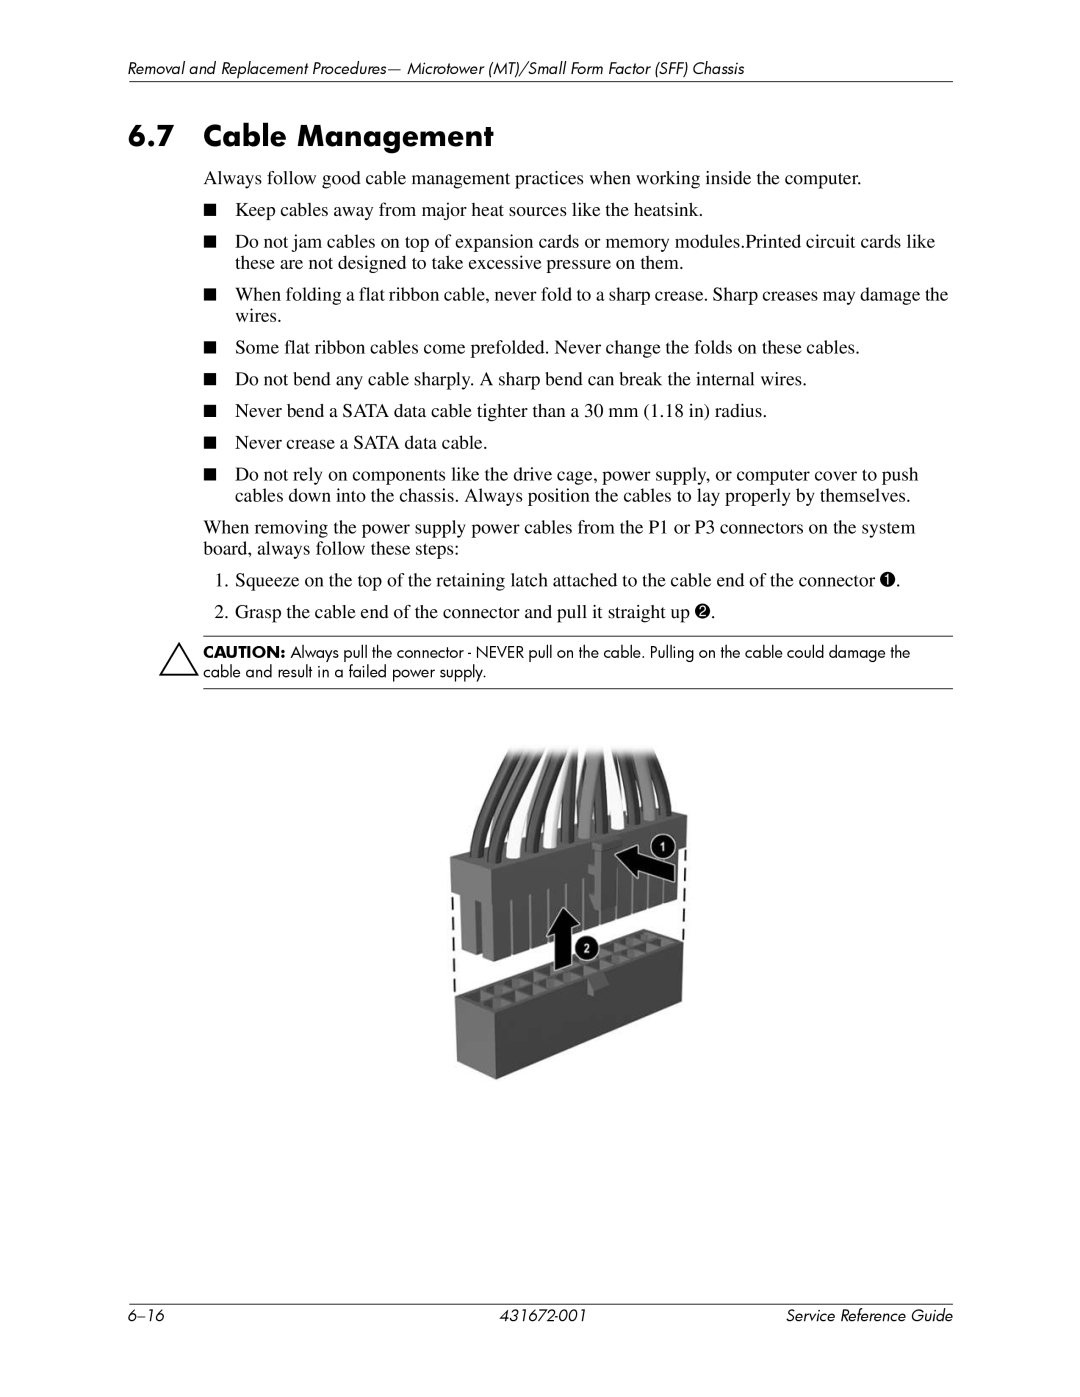 HP dx2700 manual Cable Management 